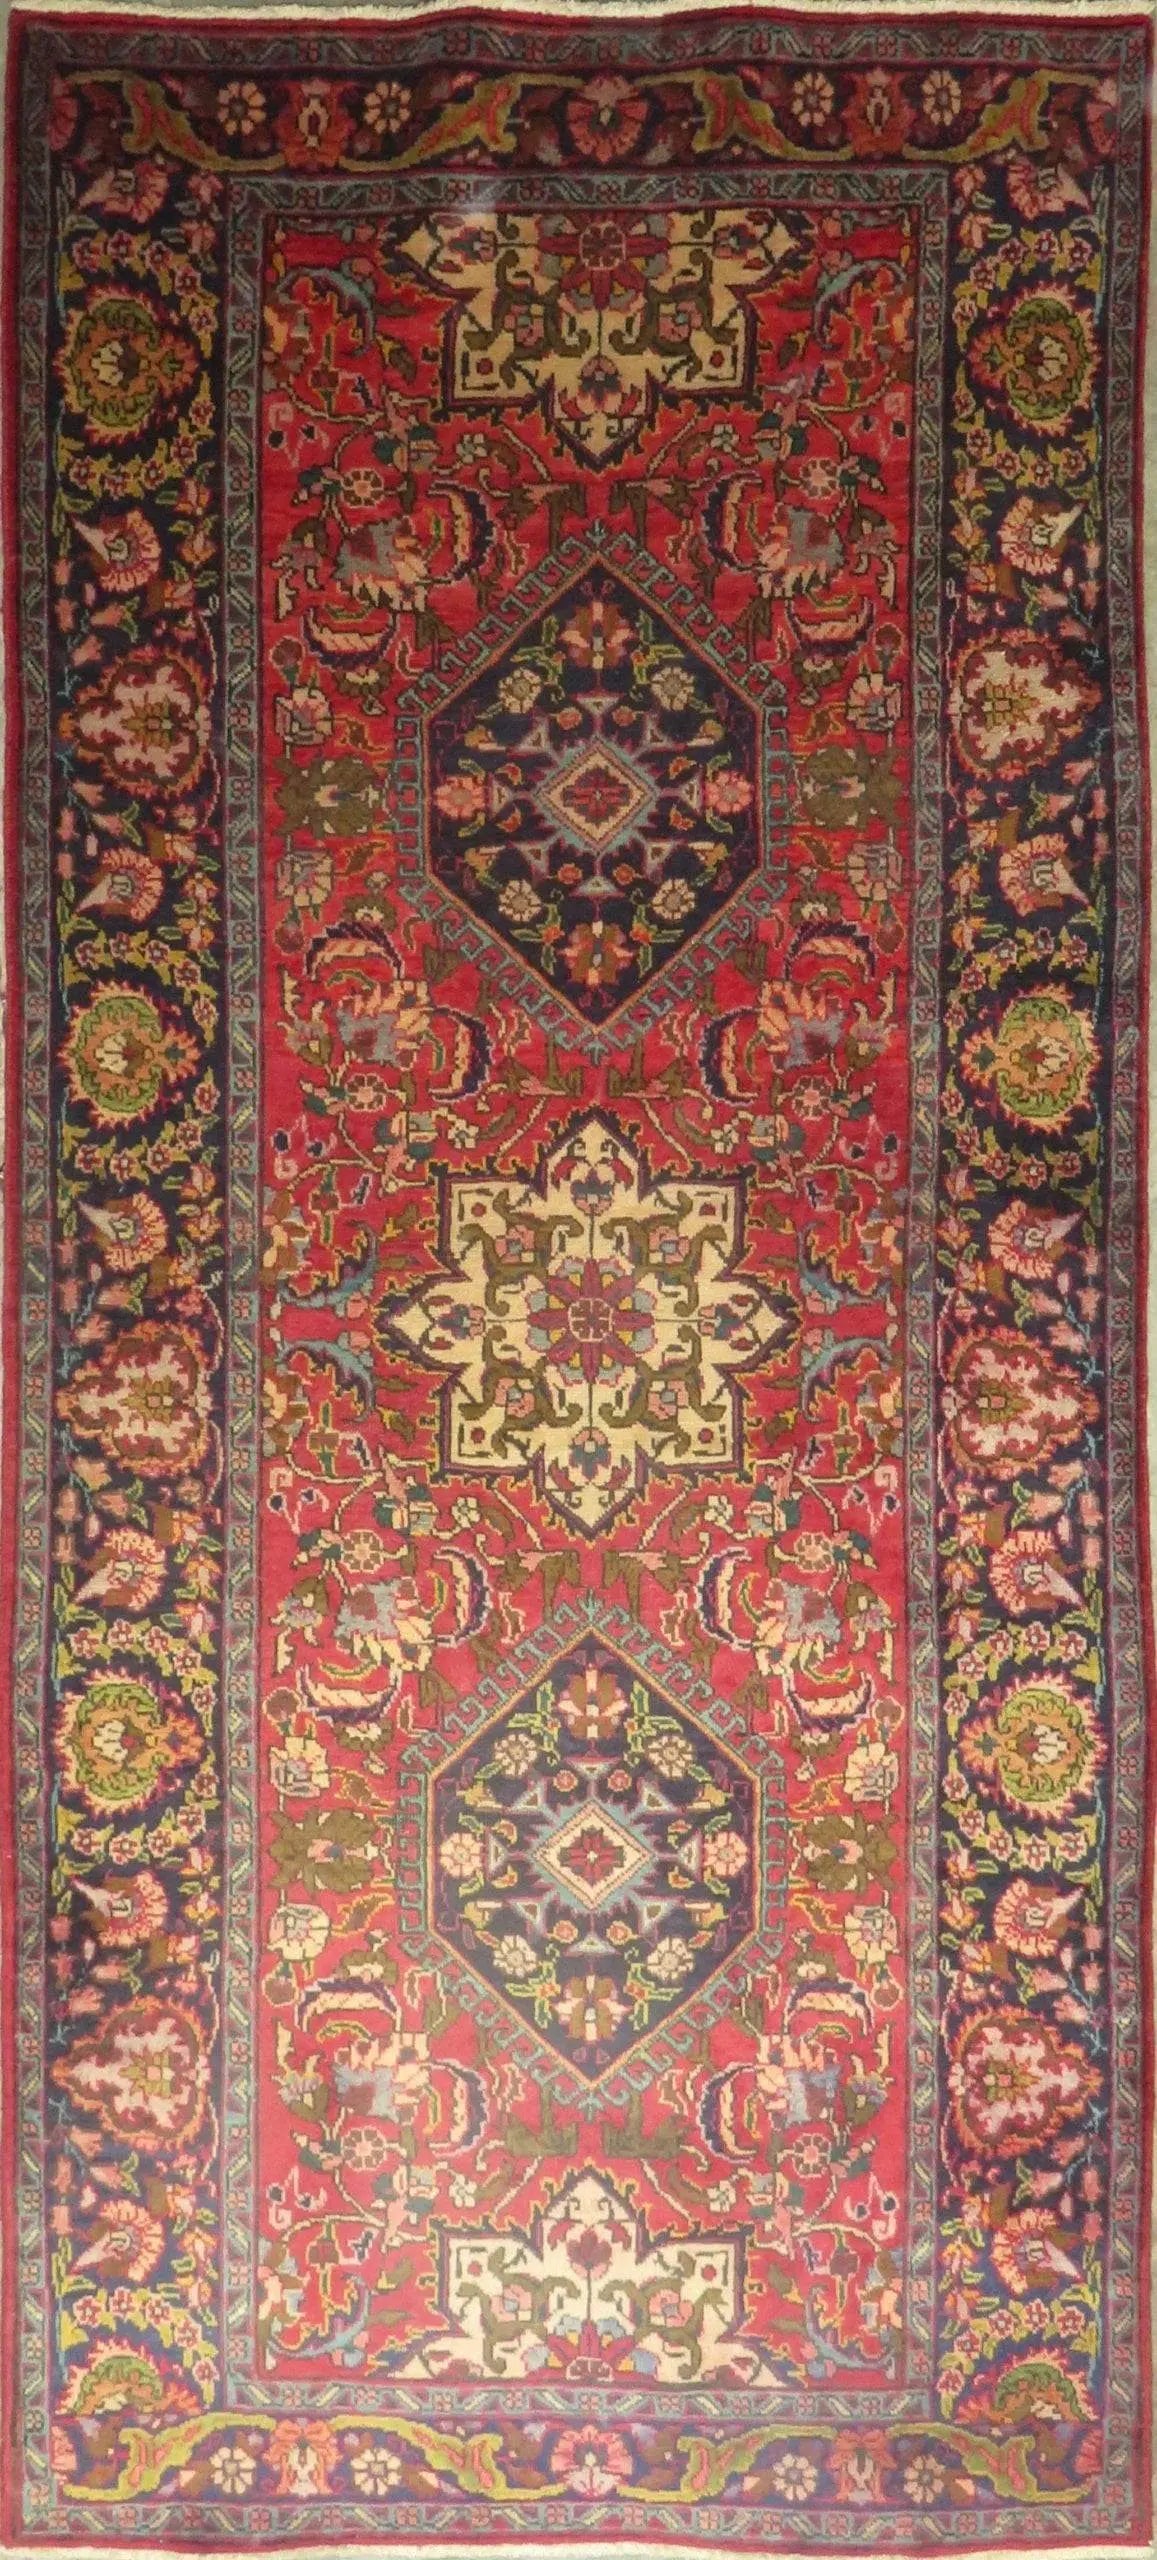 Hand-Knotted Persian Wool Rug _ Luxurious Vintage Design, 10'3" x 4'5", Artisan Crafted